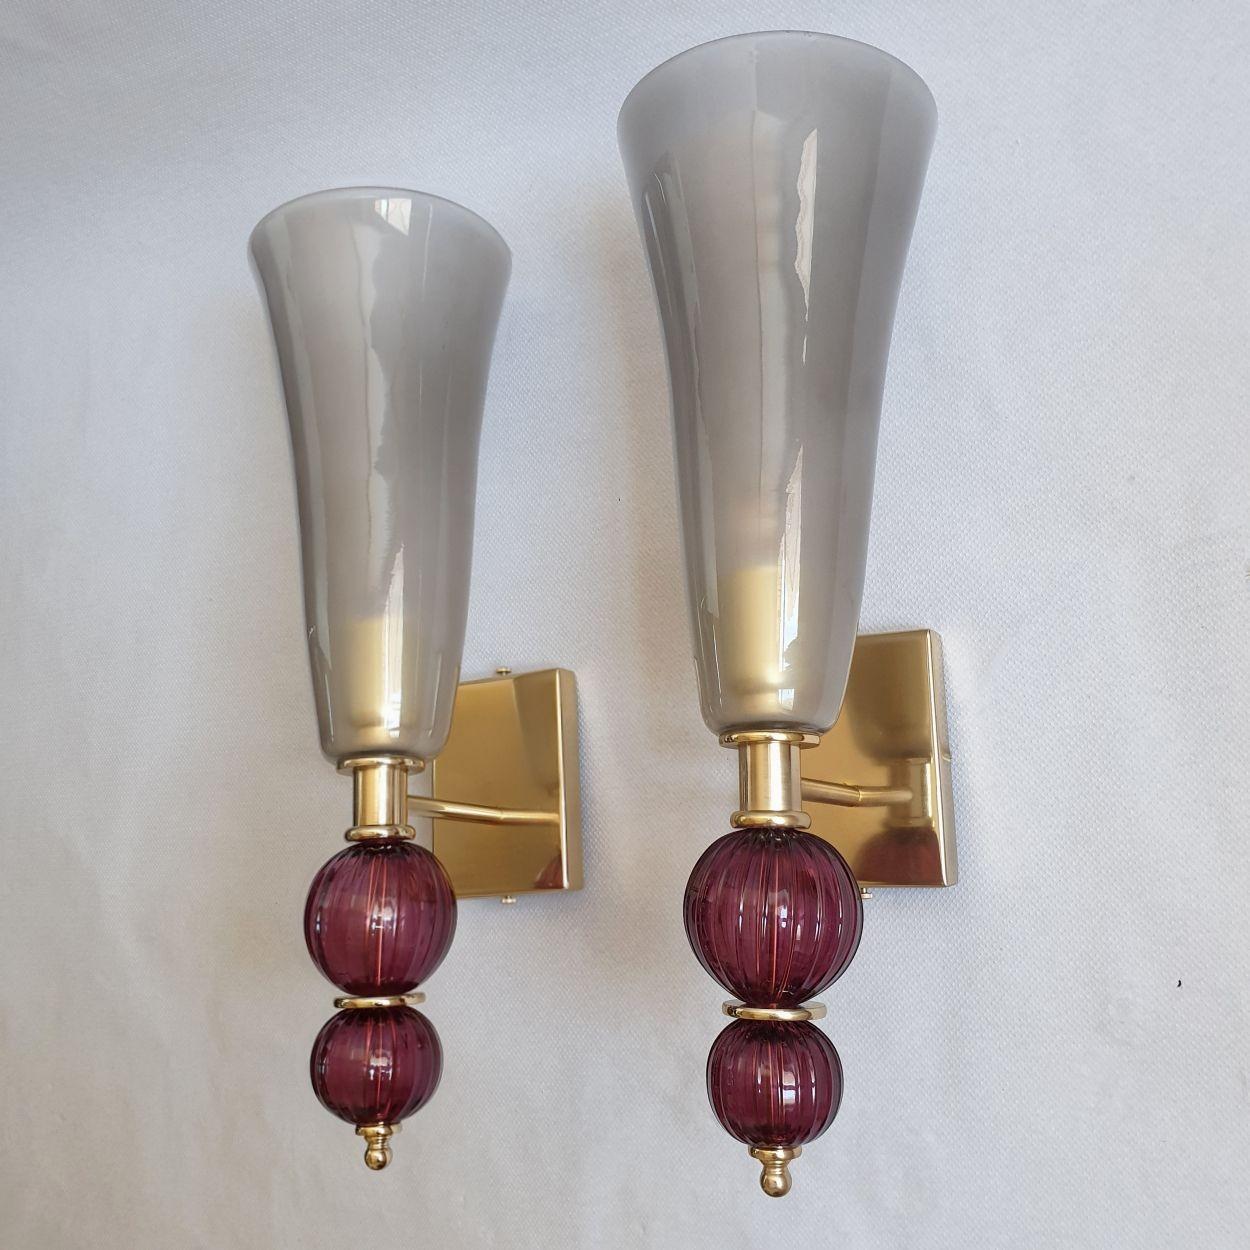 Pair of tall Mid Century Modern Murano glass sconces, attributed to Vistosi, Italy 1980s.
The pair of sconces is made of a tall urn shaped top vase in a light gray color, nesting the light.
The glass is translucent, creating a warm glow of light,